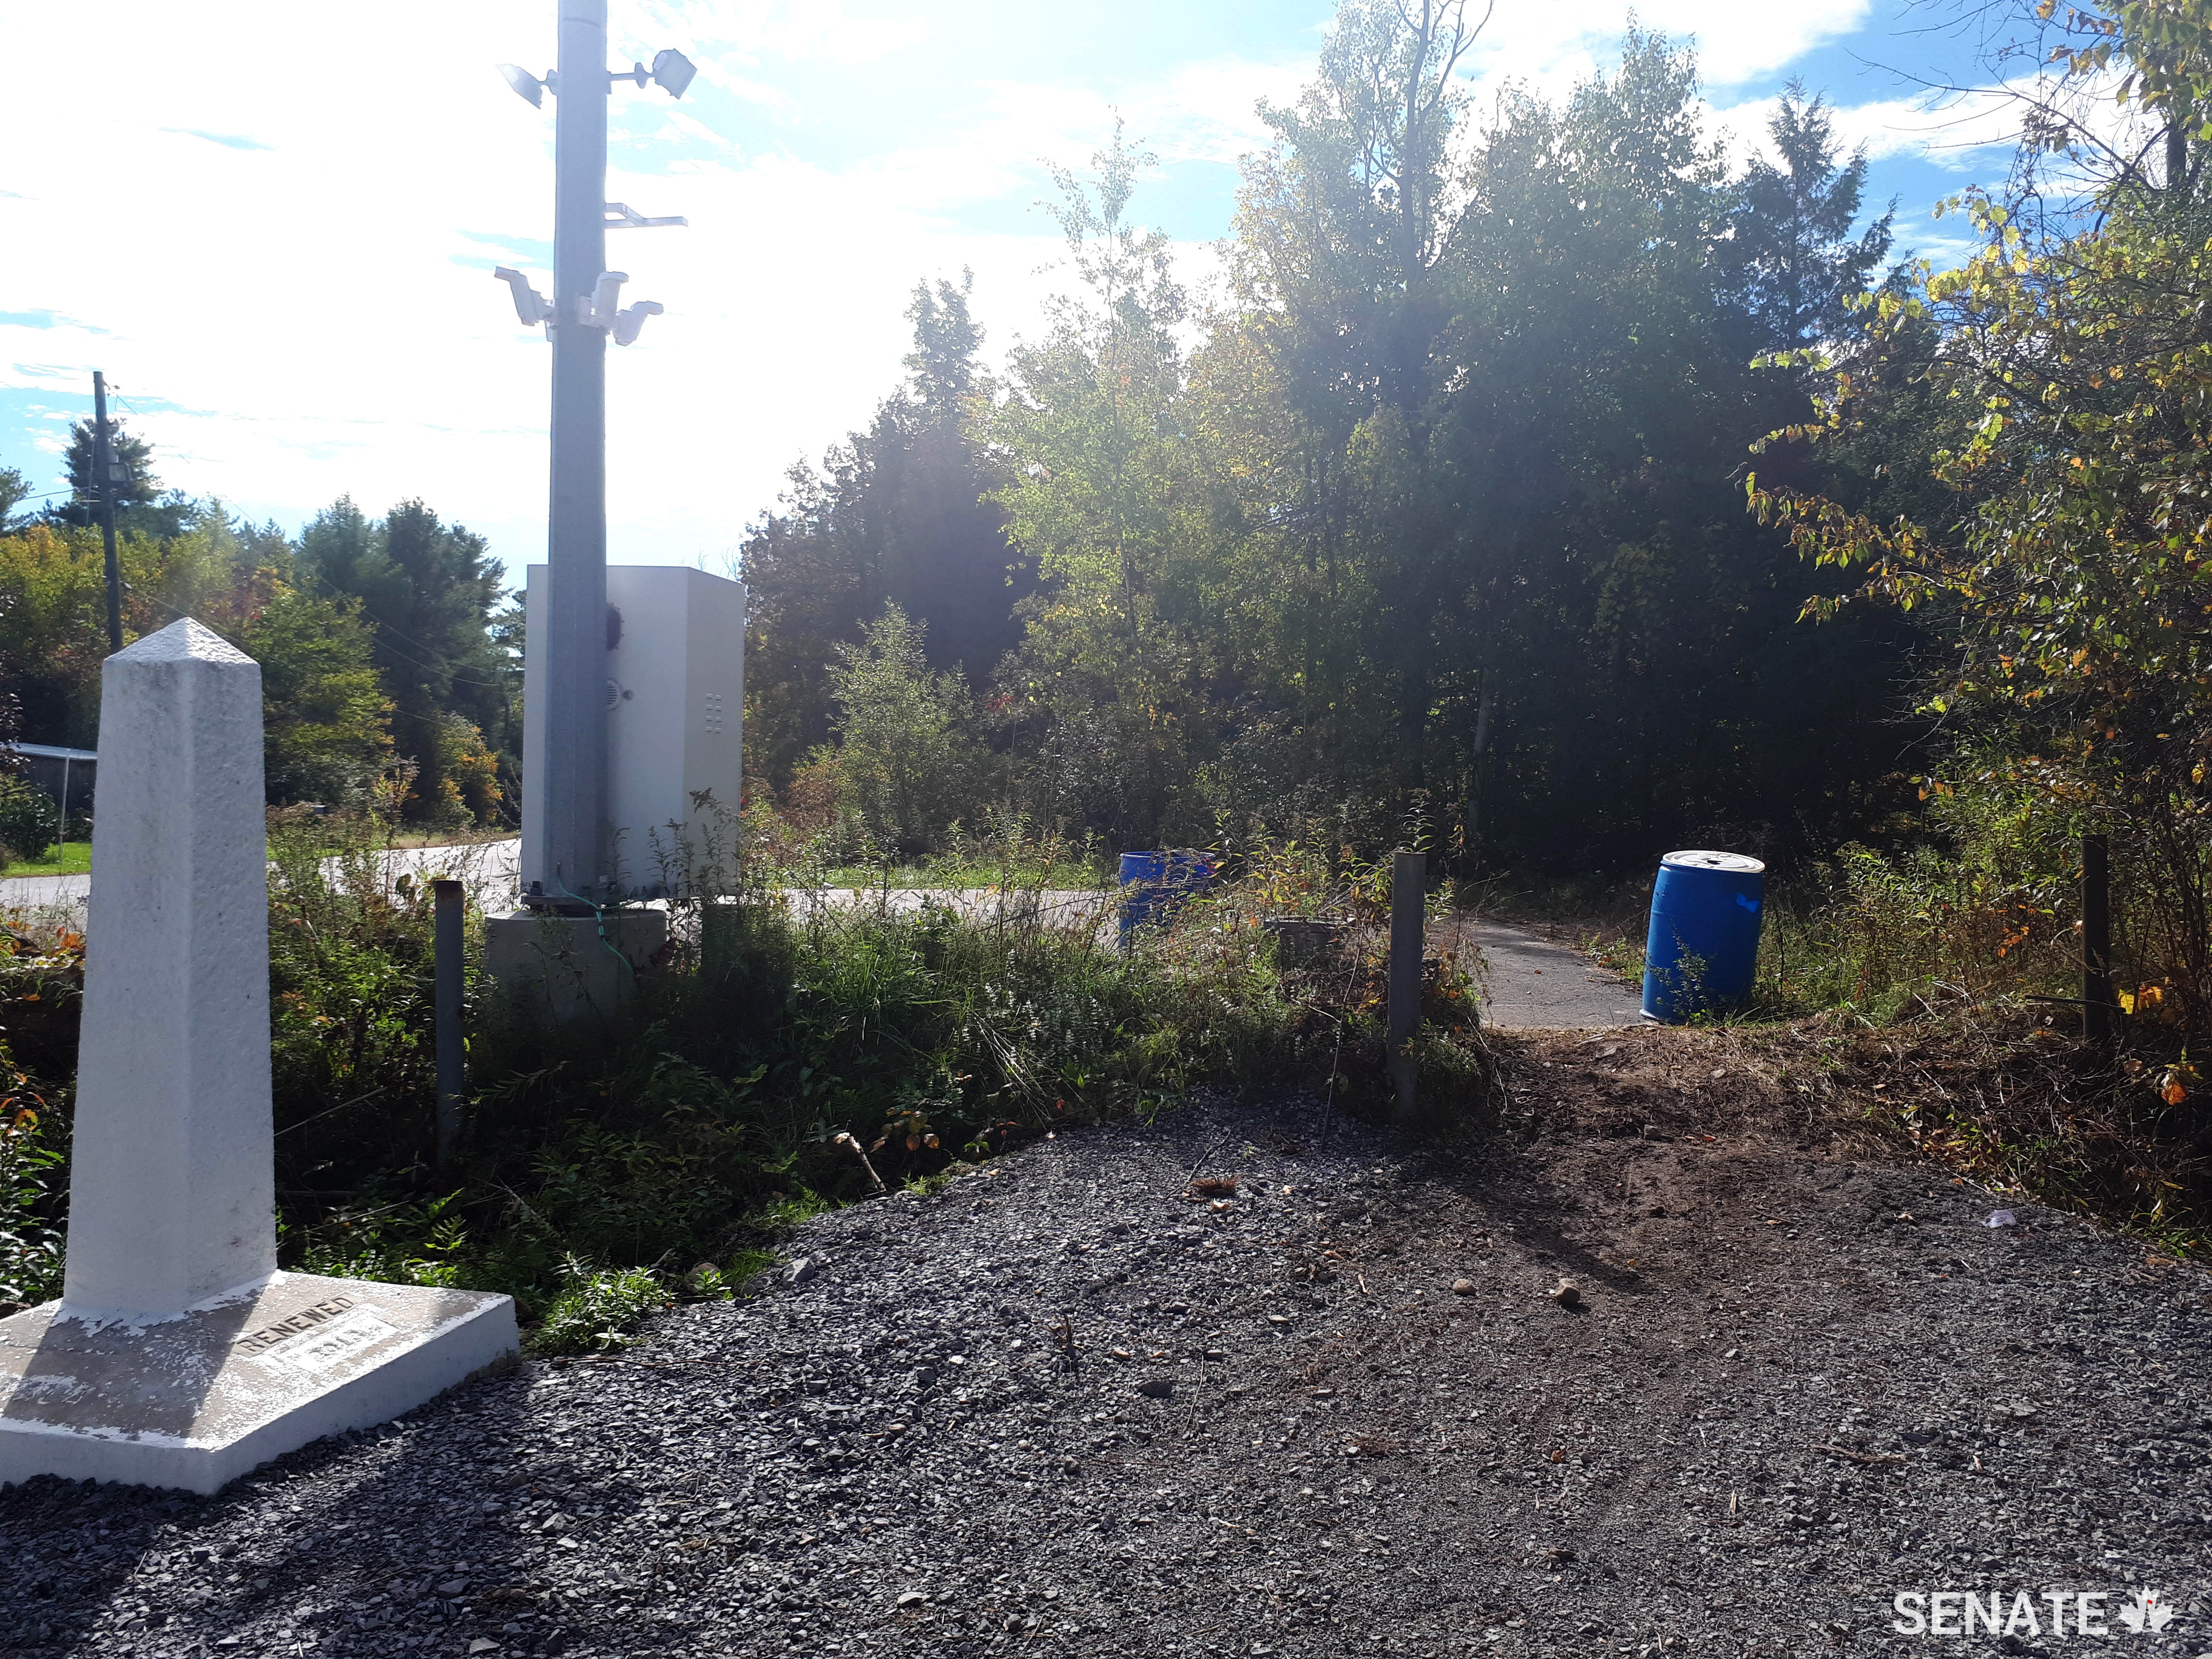 Signs mark the border between Canada and the United States at Roxham Road in Quebec. The community filled the ditch with gravel to assist asylum seekers crossing the border. (Credit: Office of Senator André Pratte)